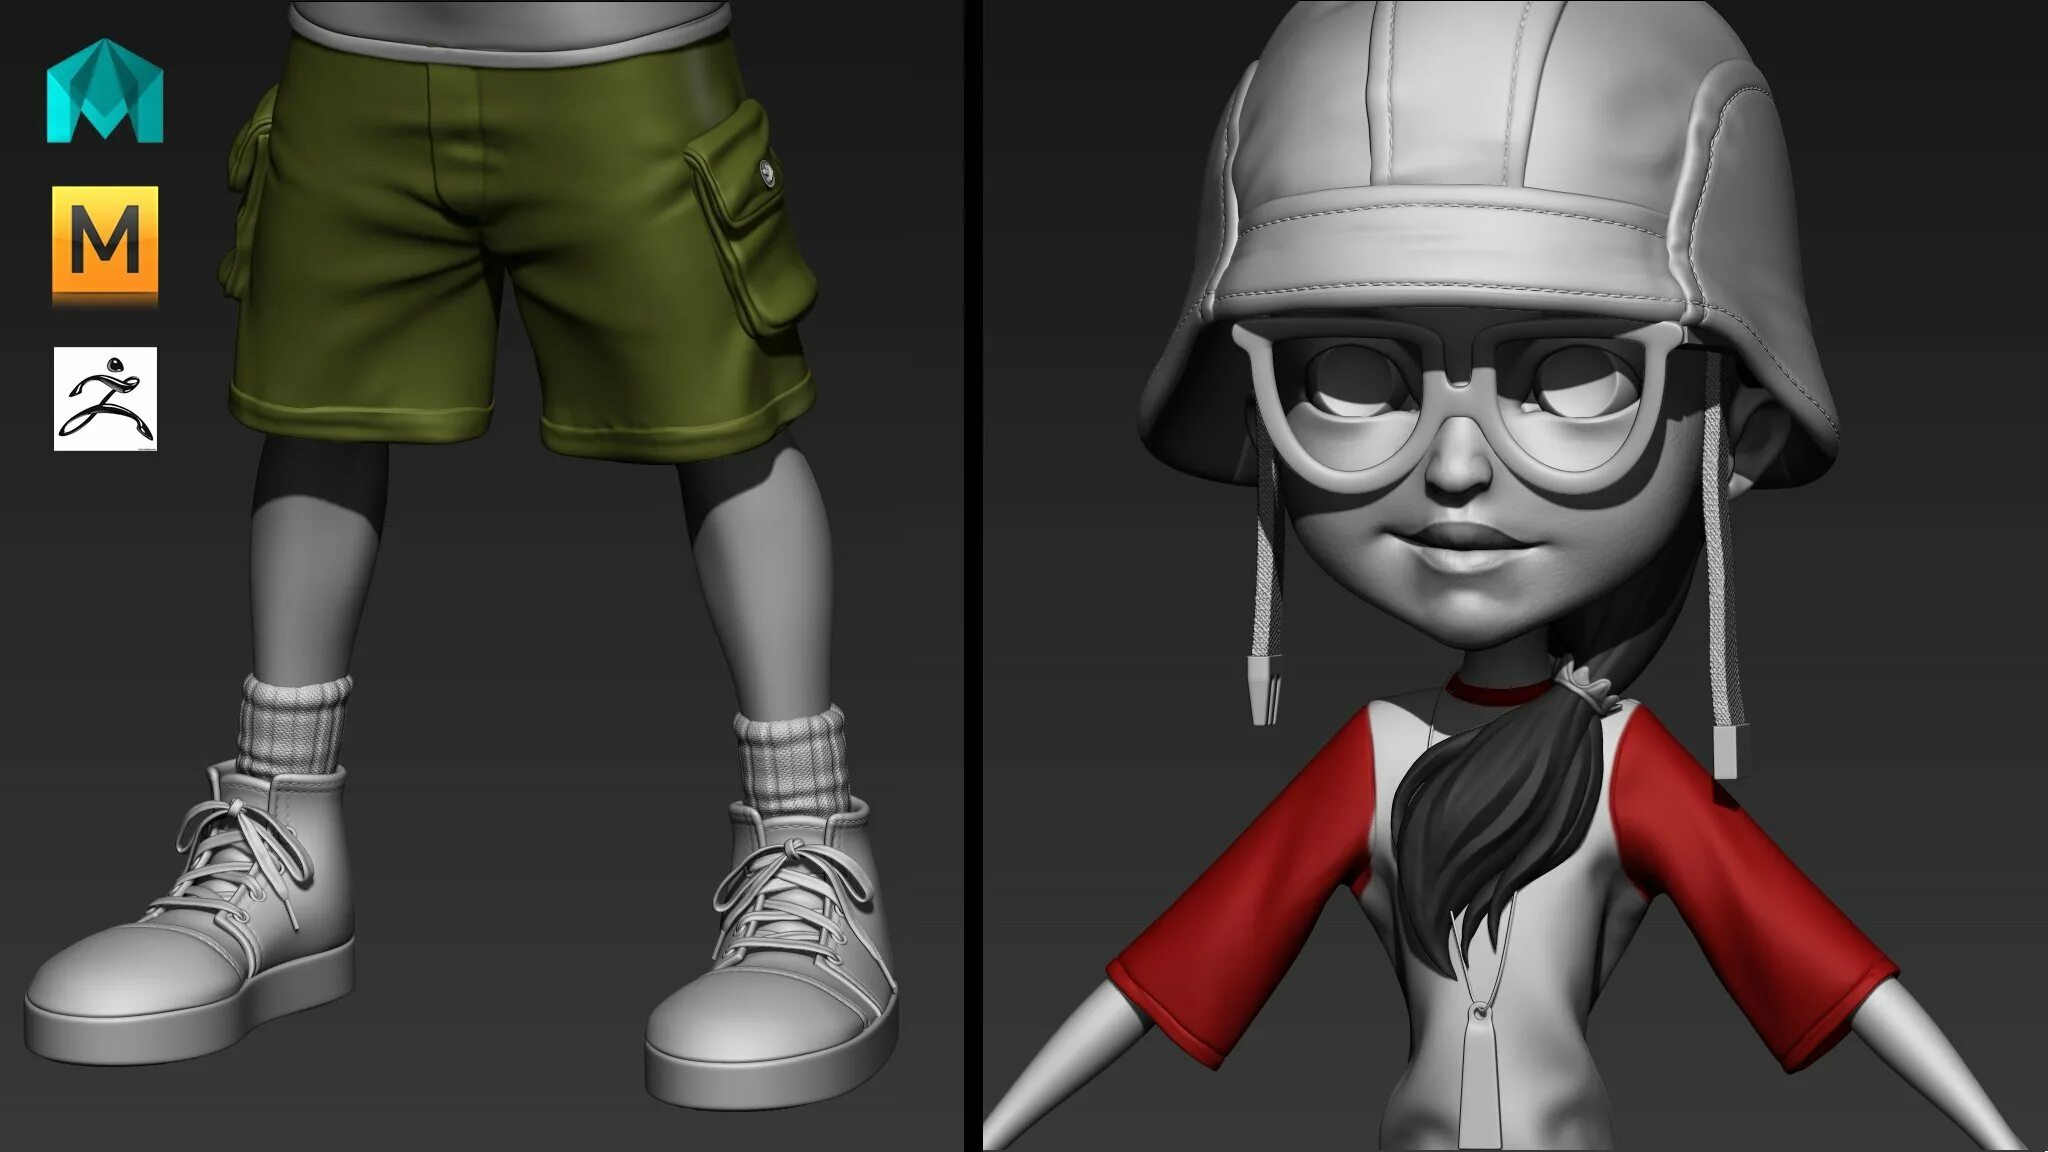 Сайты похожие на character. Zbrush игры. Кло 3д аватар. Zbrush game character. Stylized Zbrush course.